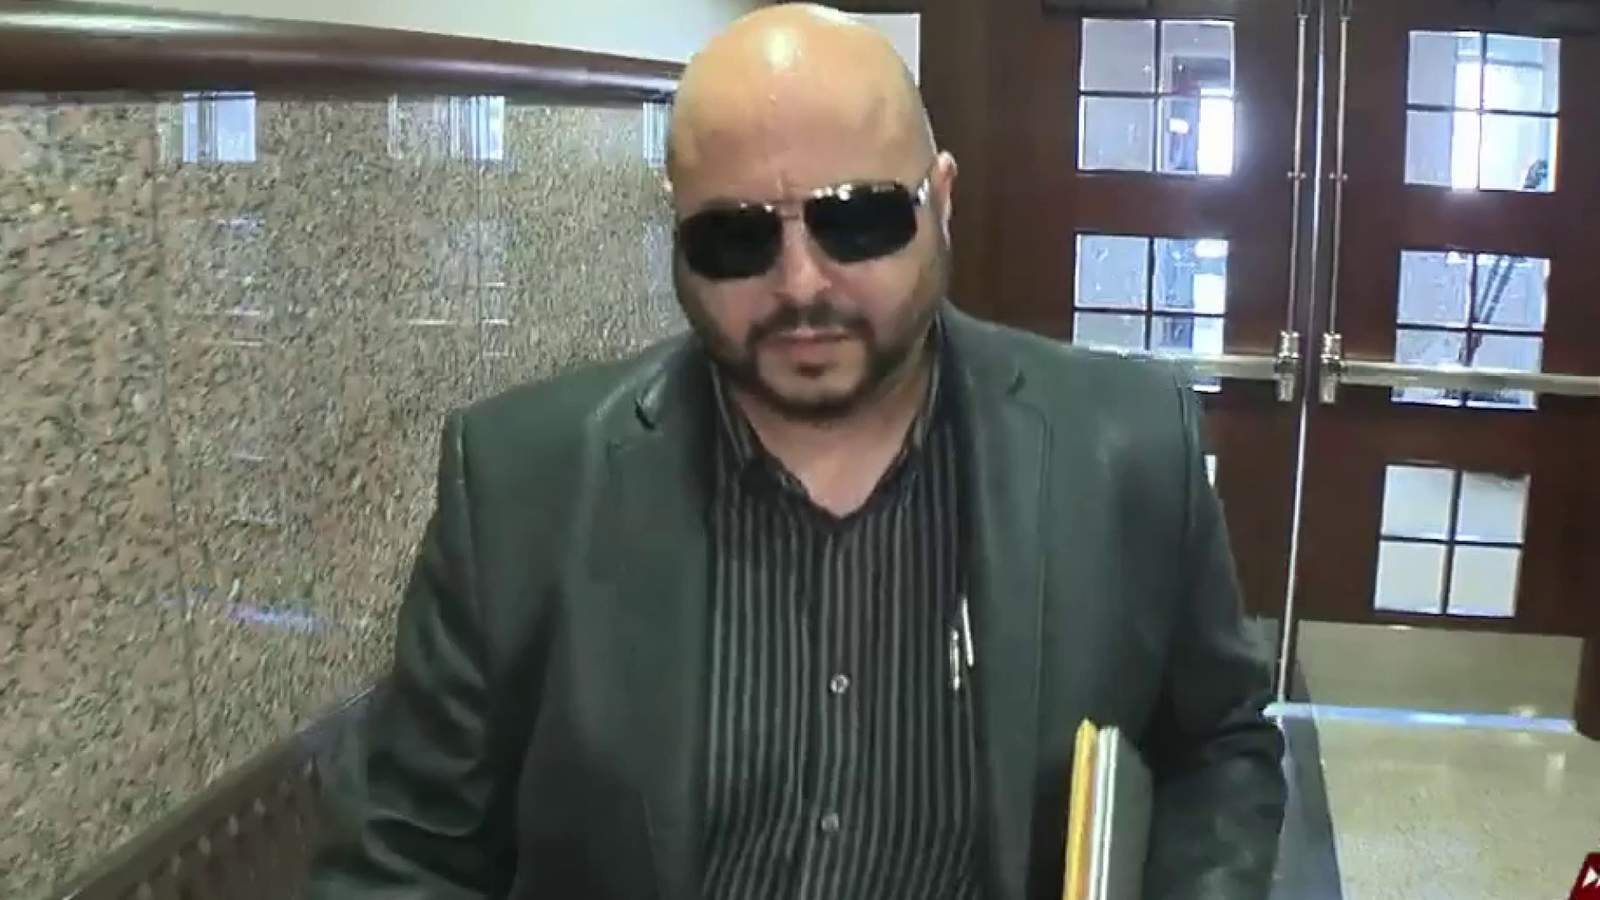 WATCH: SA judge asks disgraced attorney 5 times if he stole from clients before he admits he did